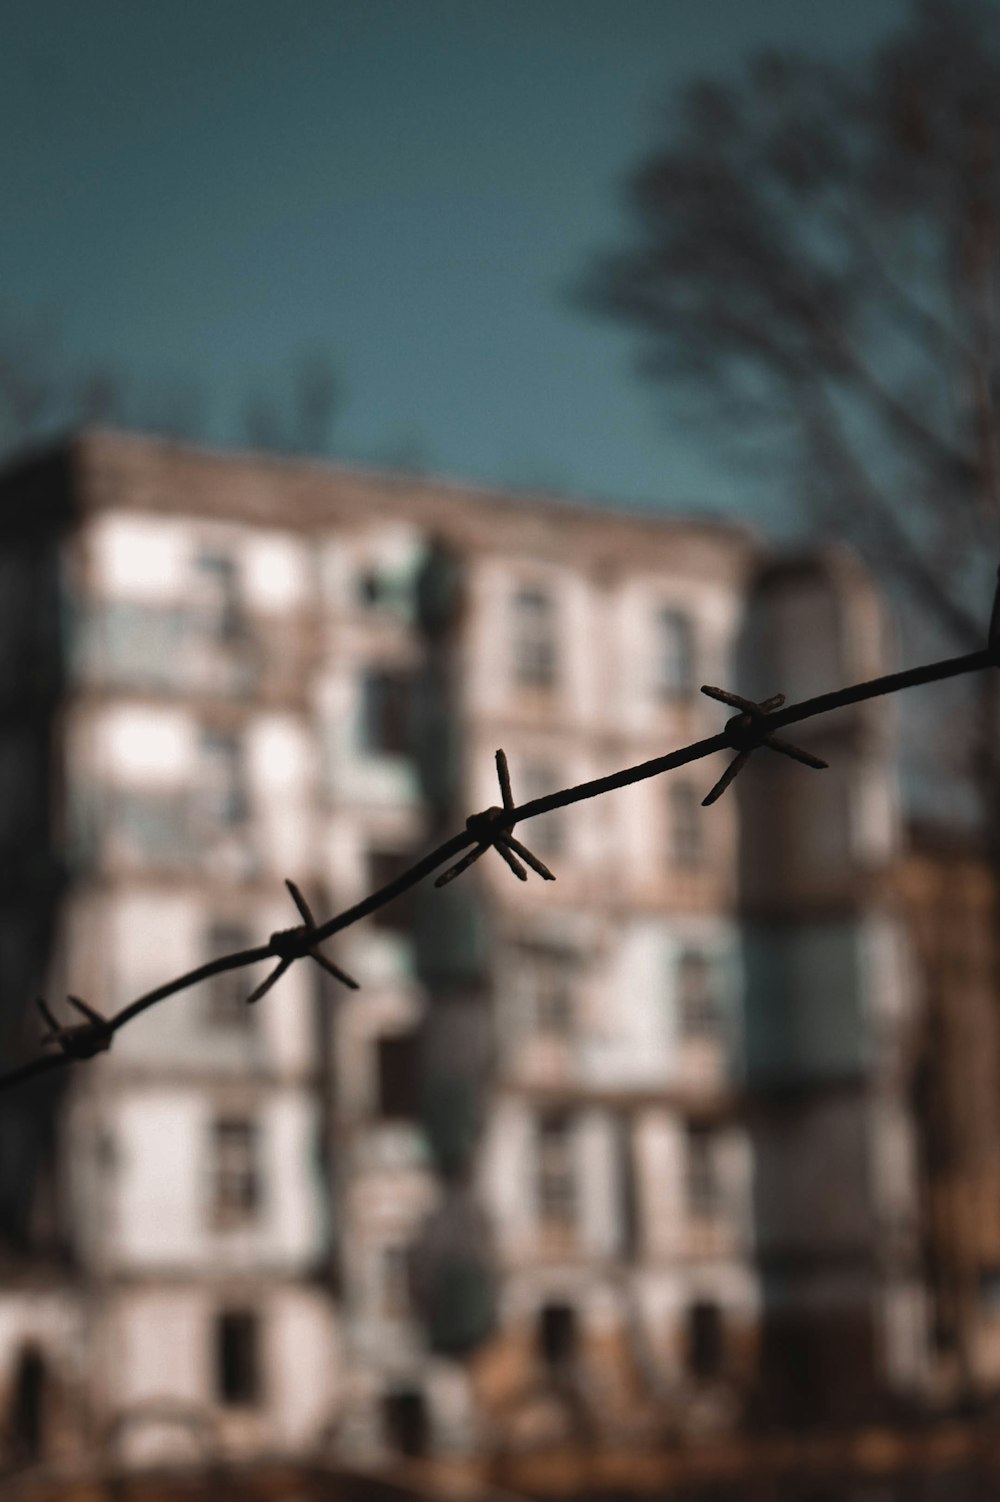 a close up of a barbed wire with a building in the background